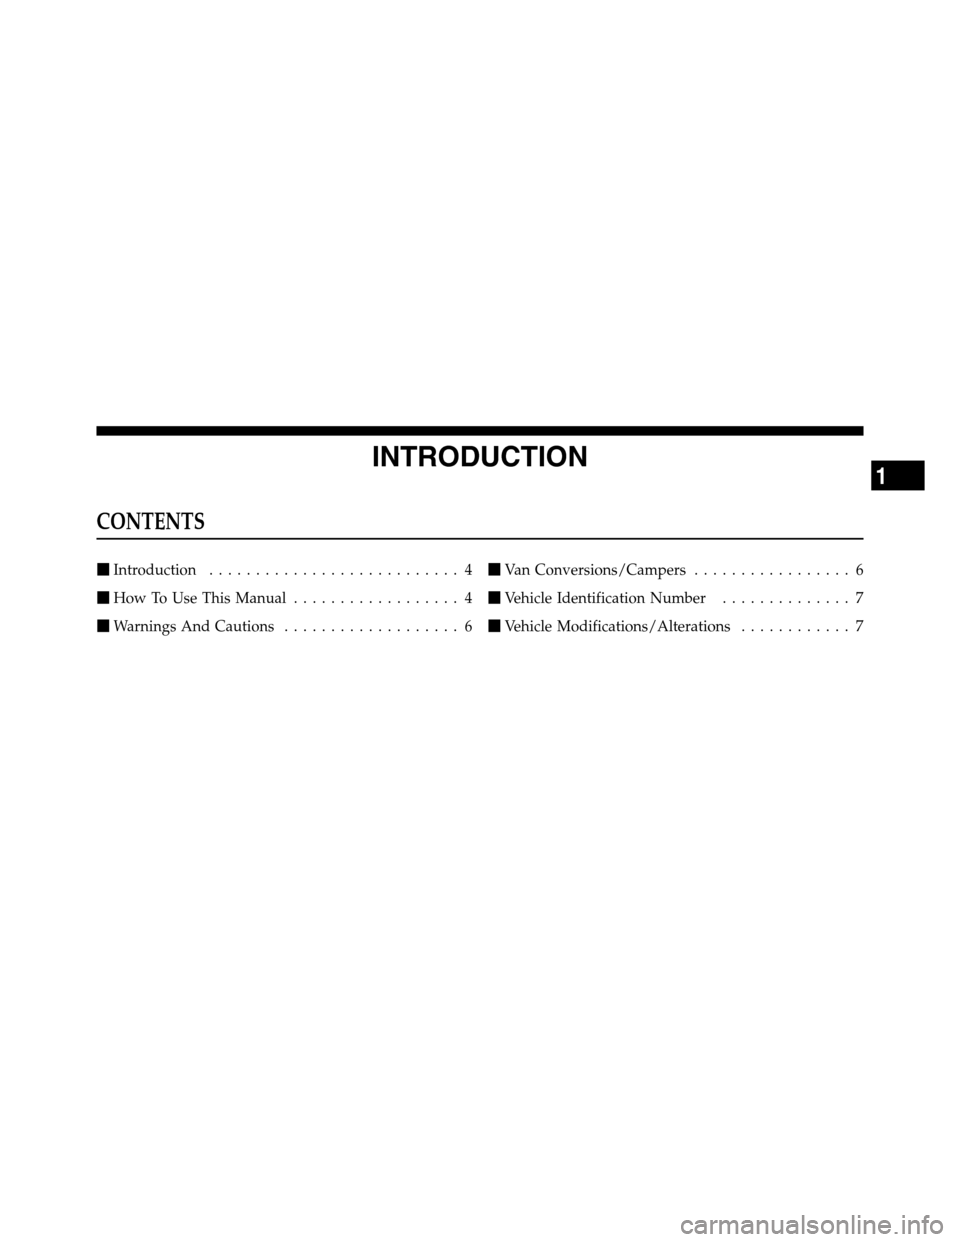 Ram 2500 2011  Owners Manual INTRODUCTION
CONTENTS
Introduction........................... 4
How To Use This Manual.................. 4
Warnings And Cautions................... 6Van Conversions/Campers................. 6
Veh